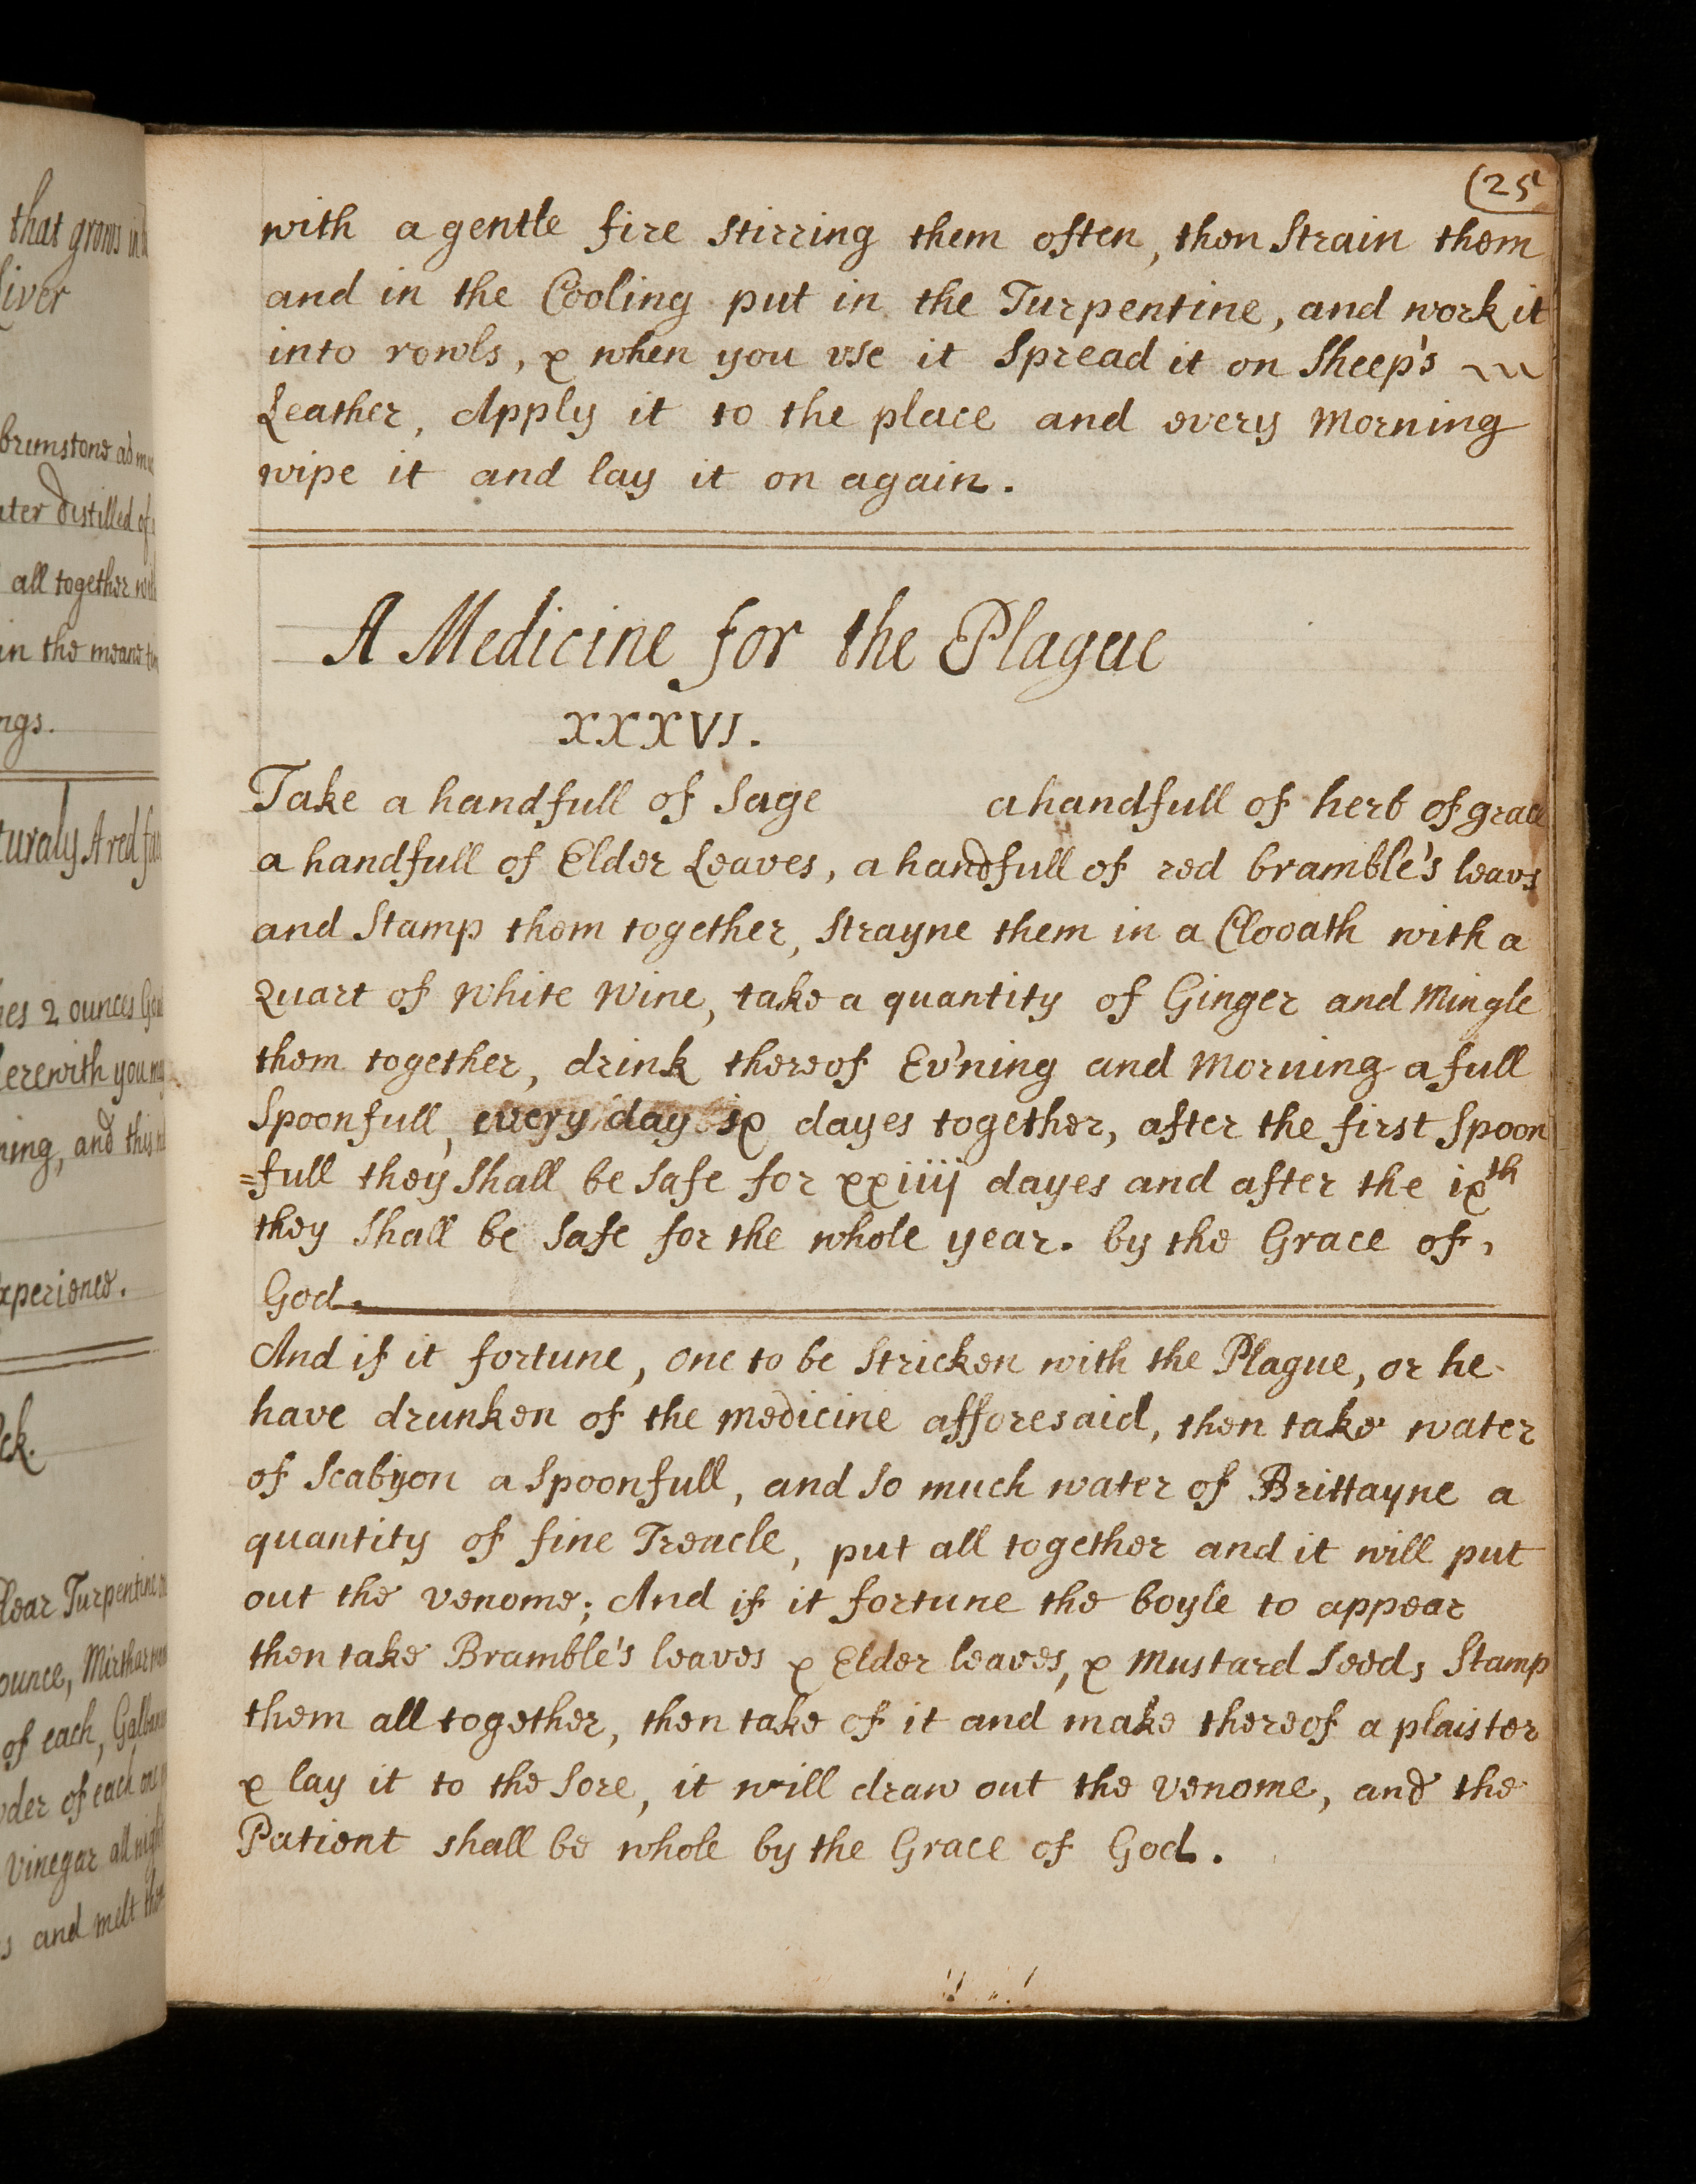 Example of a medical 'recipe' for treatment of the plague in Lady Sedley's receipt book, 1686 (MS534, p25)